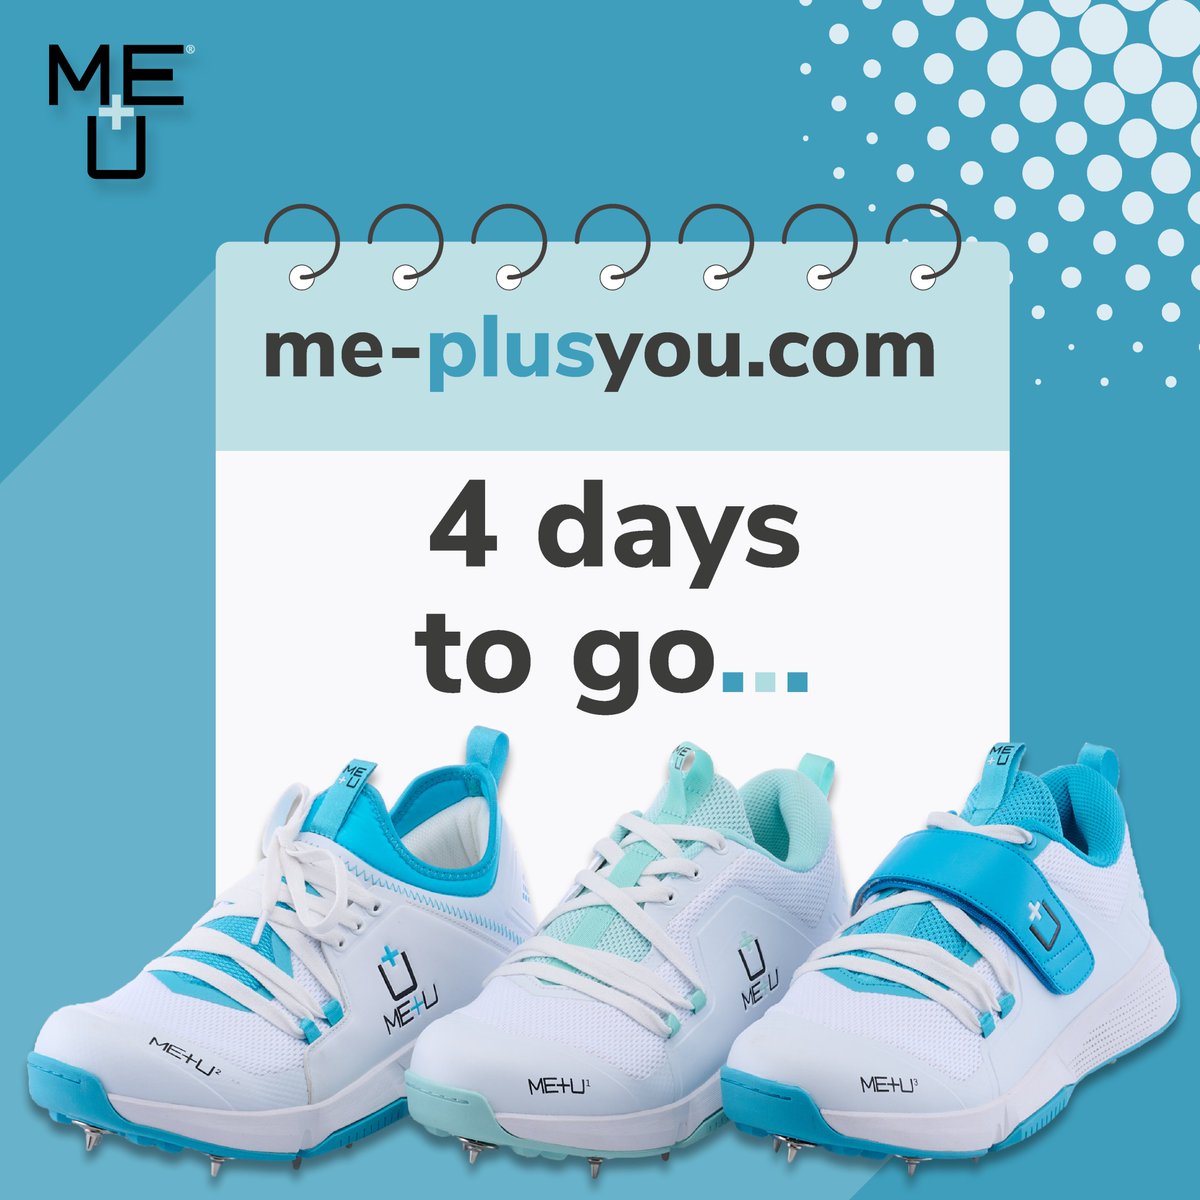 Only 5 sleeps and 4 days until the launch of our website! From left to right we have the Men's All Rounder, the Women's All Rounder and the Men's Bowler. Each have unique features, these promise to be comfortable and stable, GAME-CHANGERS! me-plusyou.com